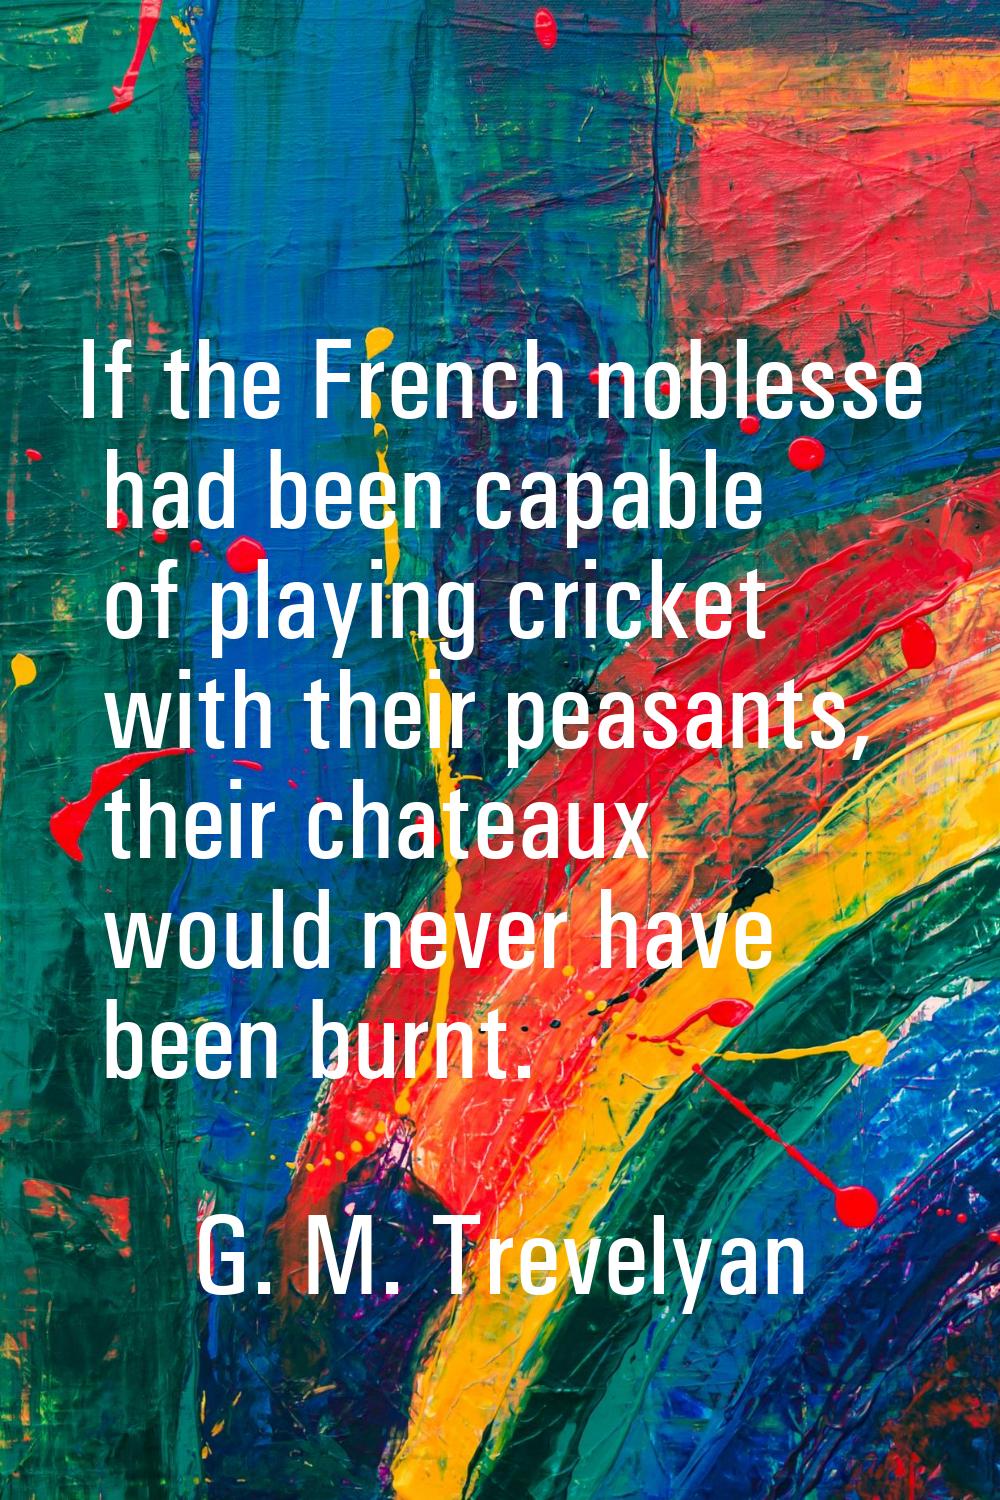 If the French noblesse had been capable of playing cricket with their peasants, their chateaux woul